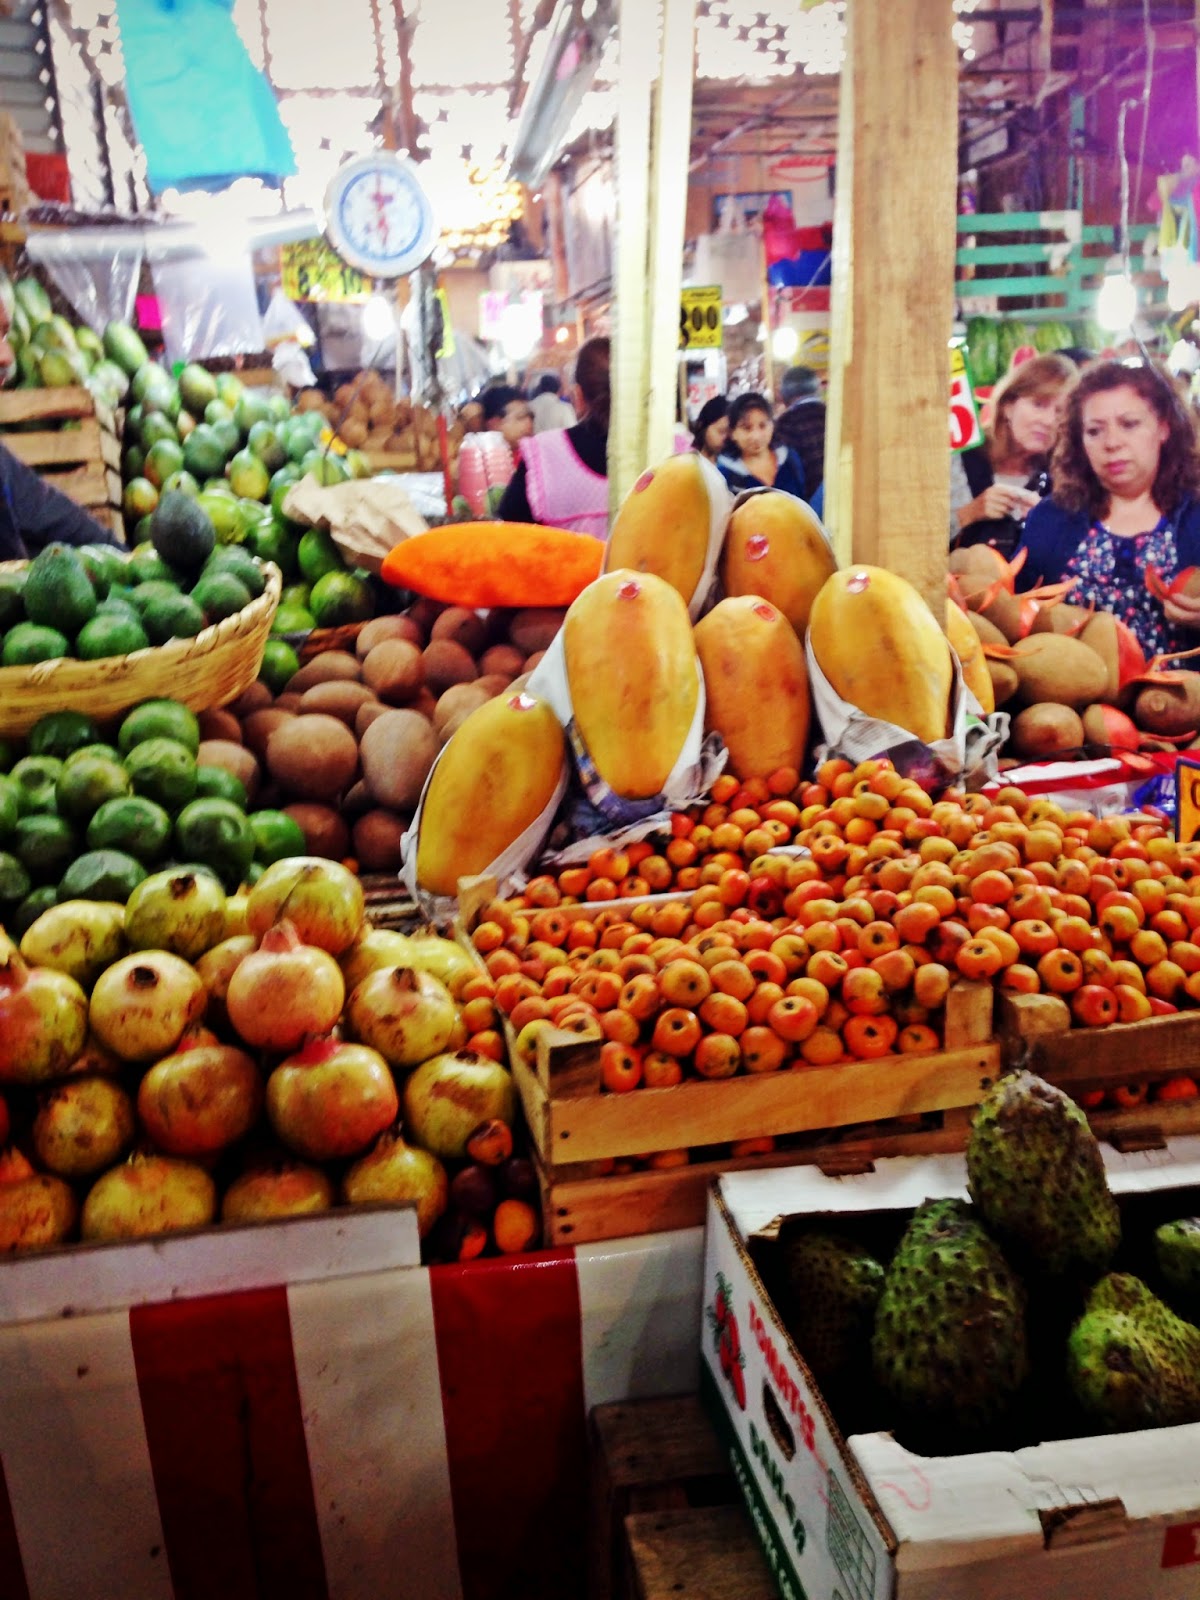 Sampling Tropical Fruits in Mexico | The Right-Brained Engineer